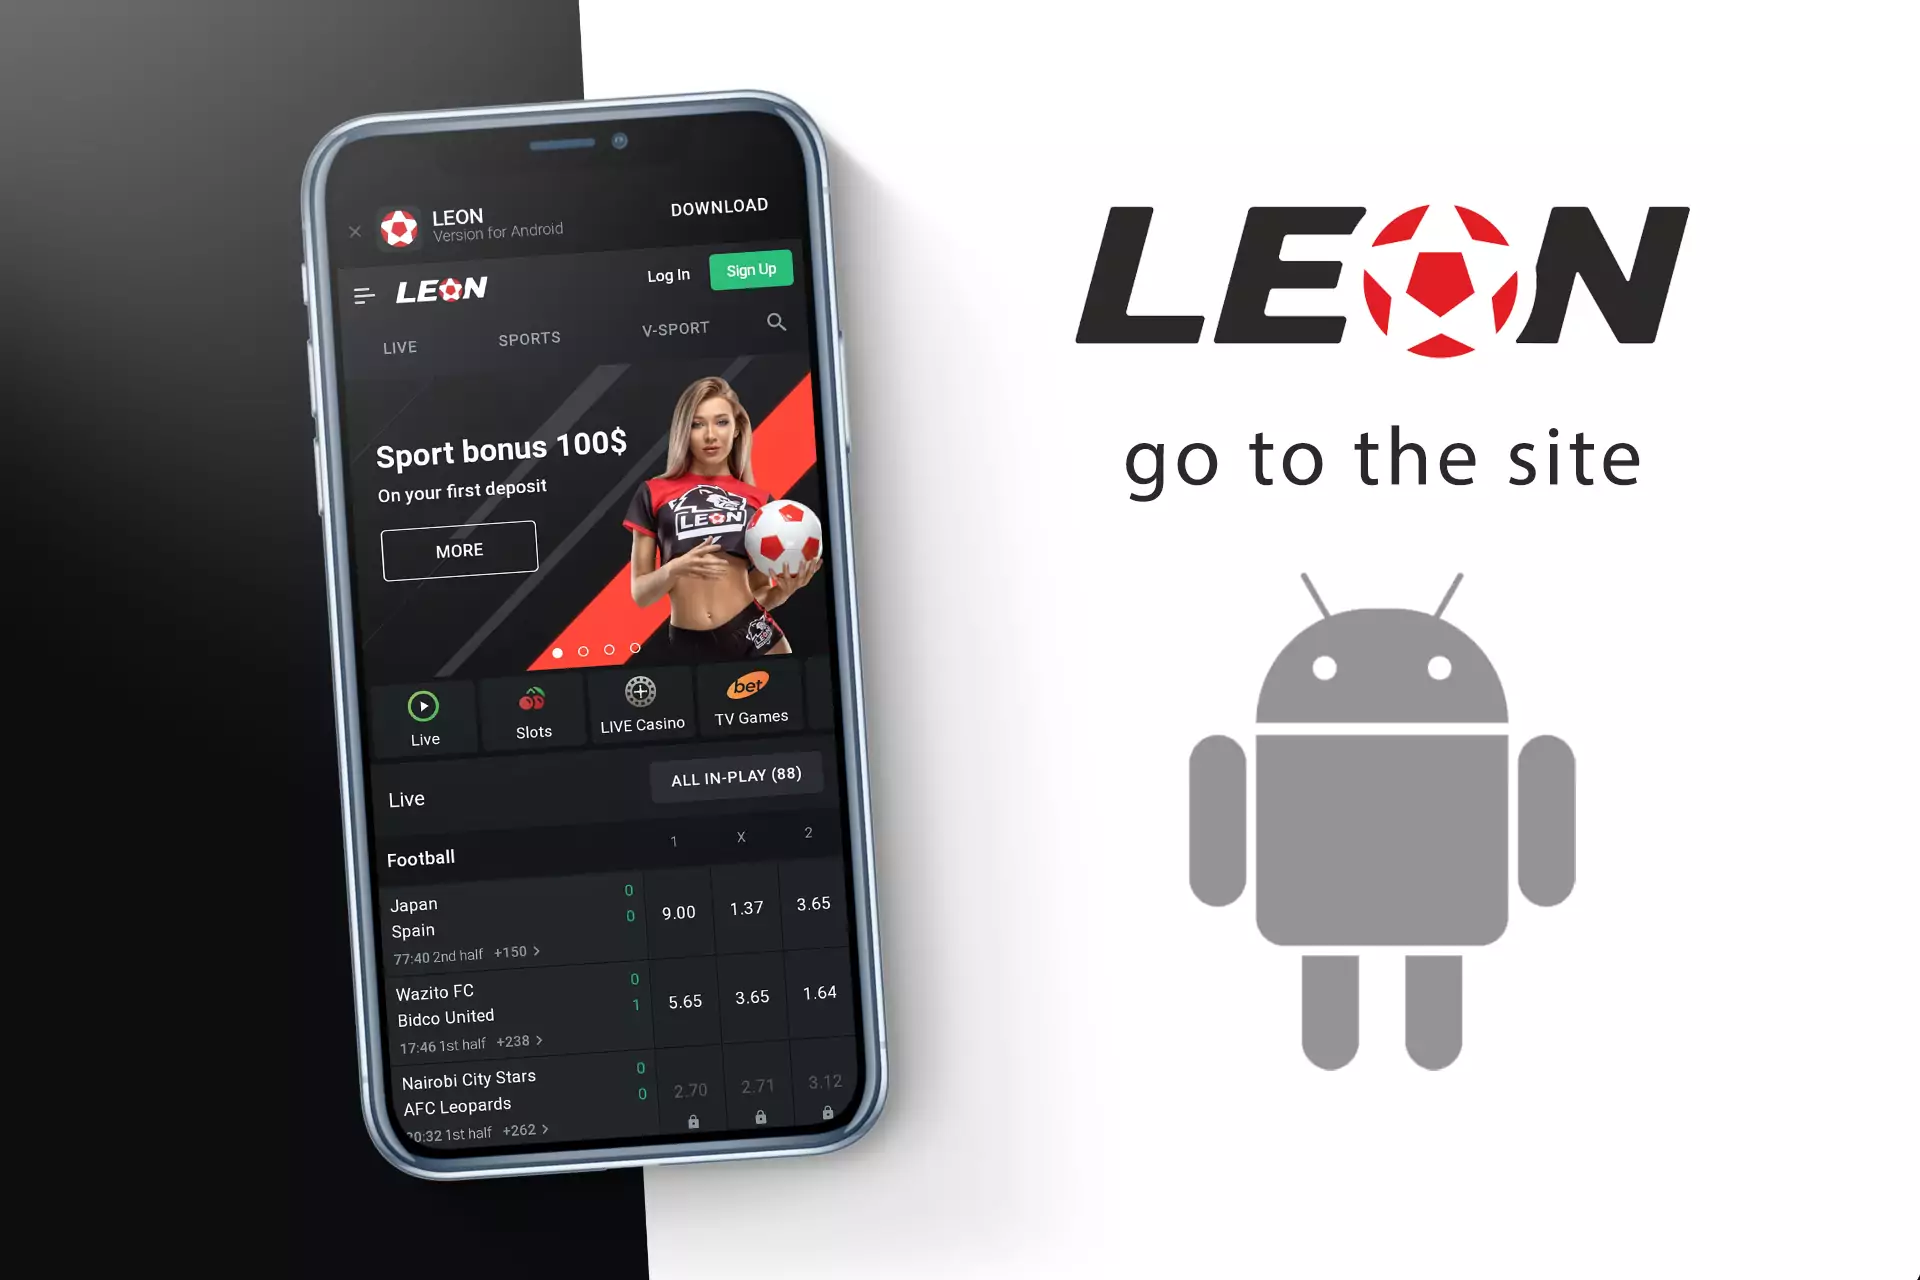 Open the site of Leon Bet in your mobile browser.